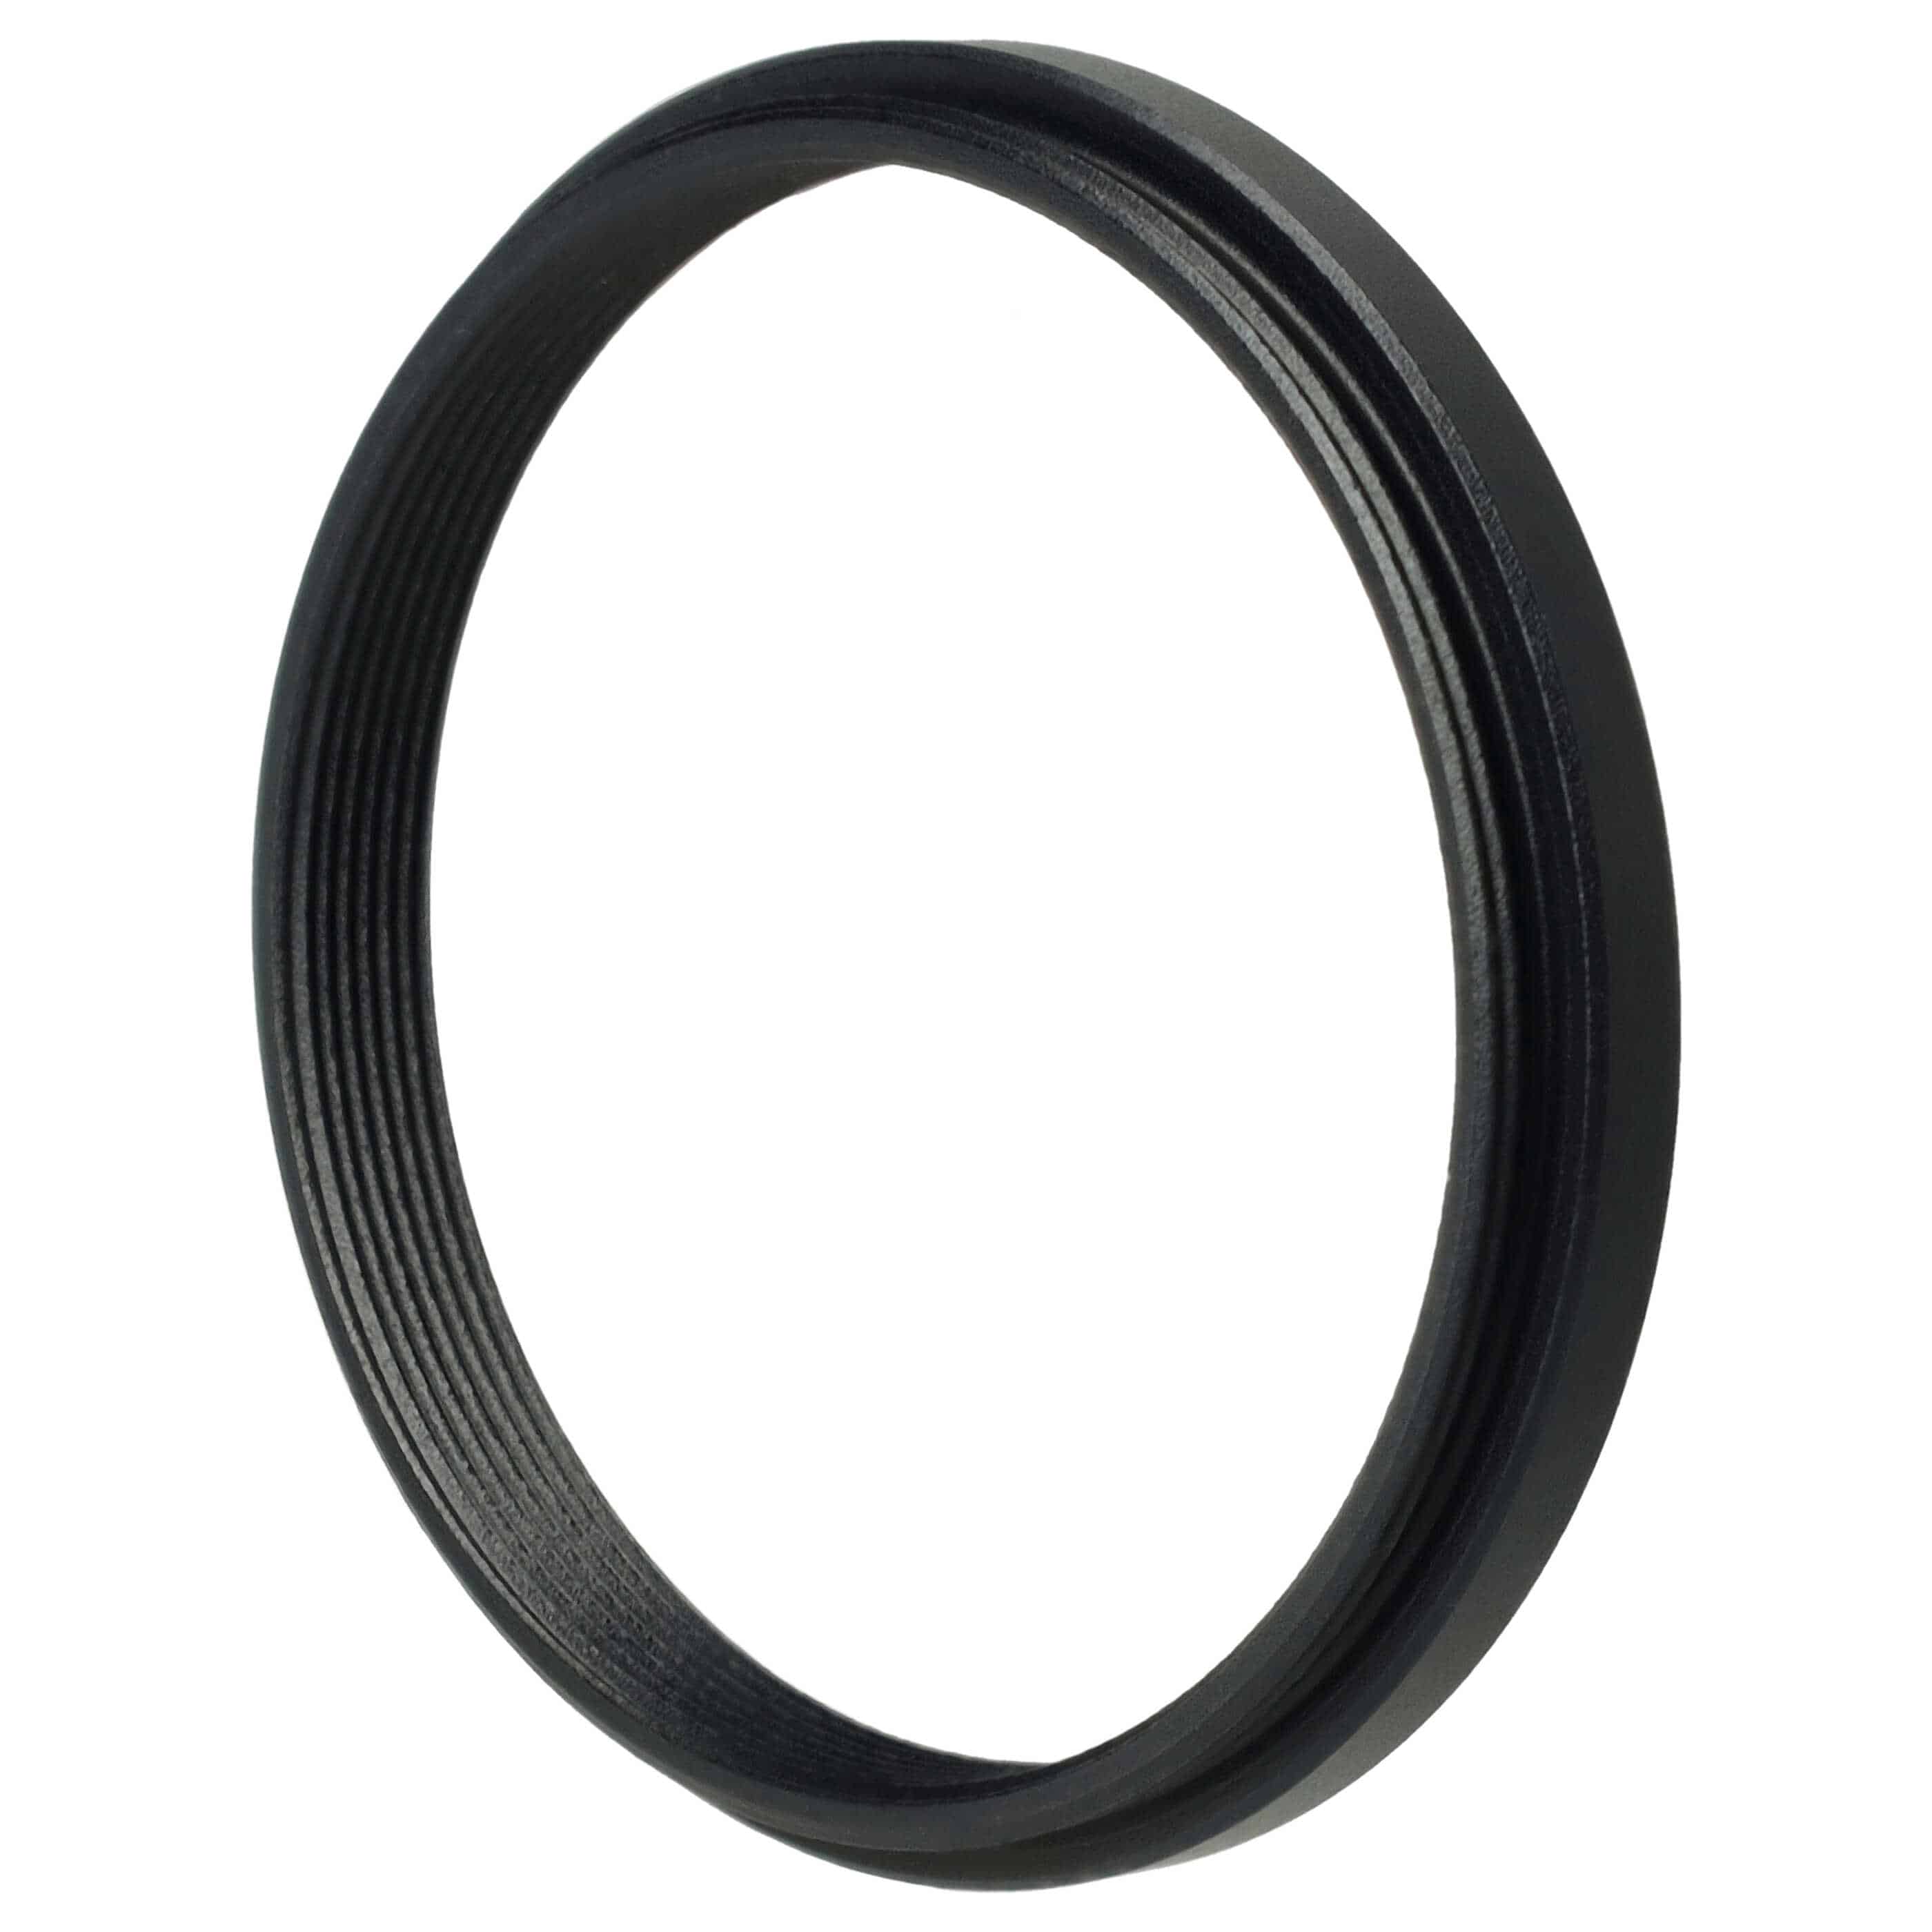 Step-Down Ring Adapter from 46 mm to 43 mm suitable for Camera Lens - Filter Adapter, metal